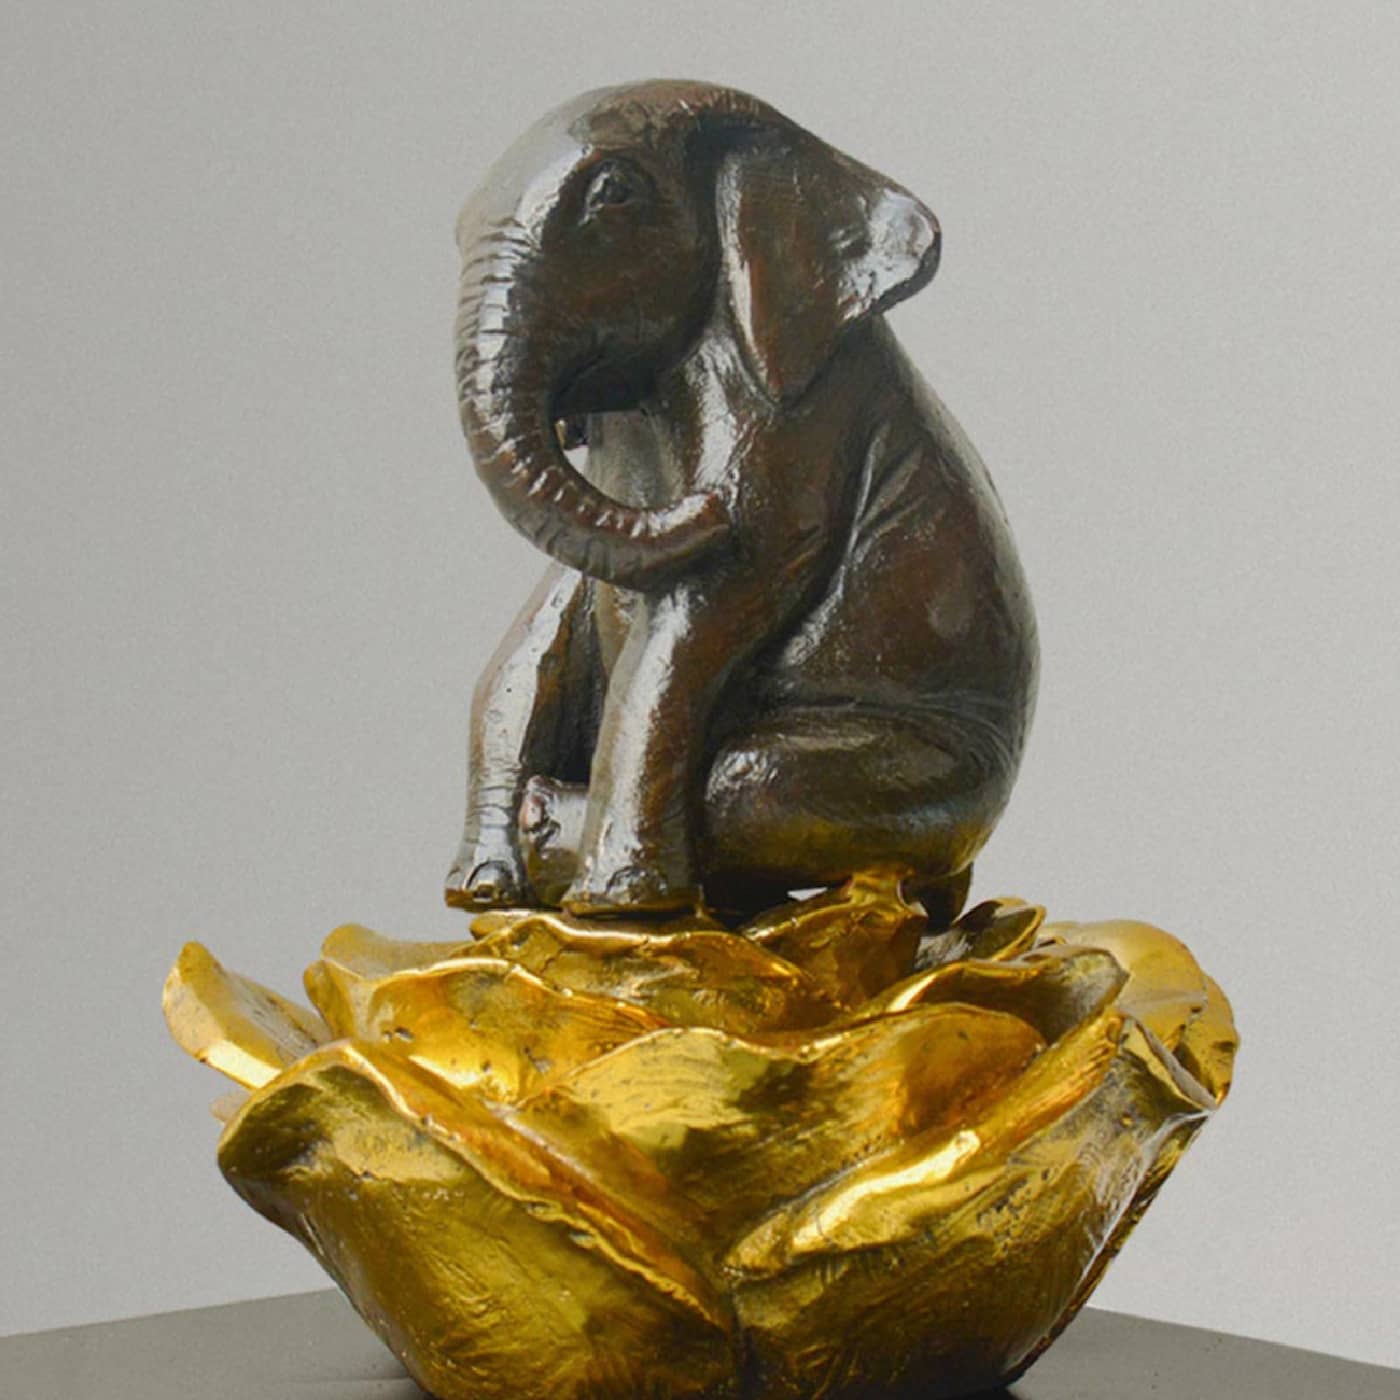 Gillie and Marc Sculpture ~ 'The Elephant Was in Golden Bloom' - Curate Art & Design Gallery Sorrento Mornington Peninsula Melbourne